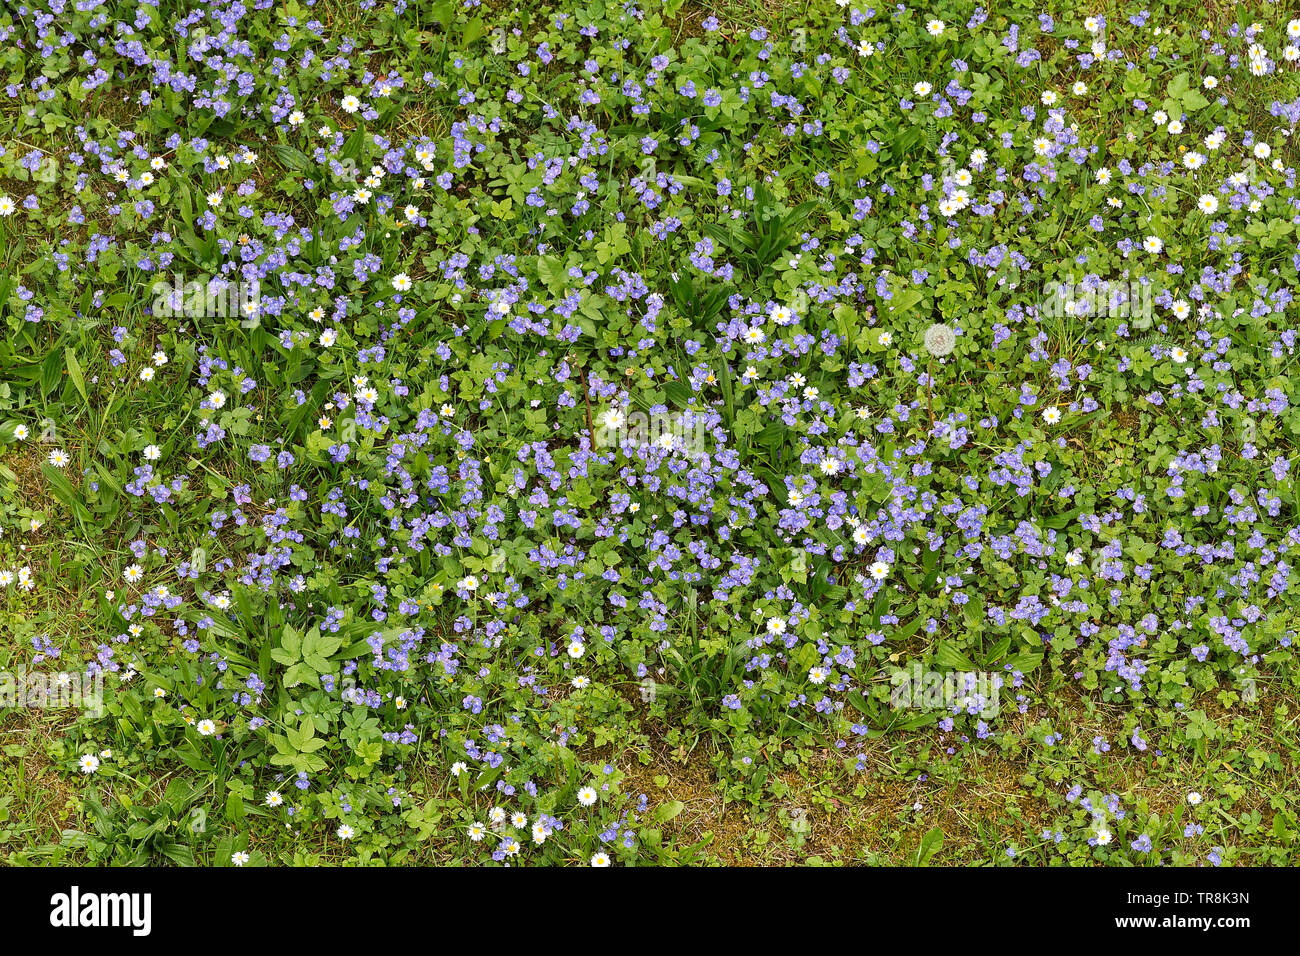 Forget-me-not flowers blooming in the green grass. Blooming little blue meadow flower Stock Photo